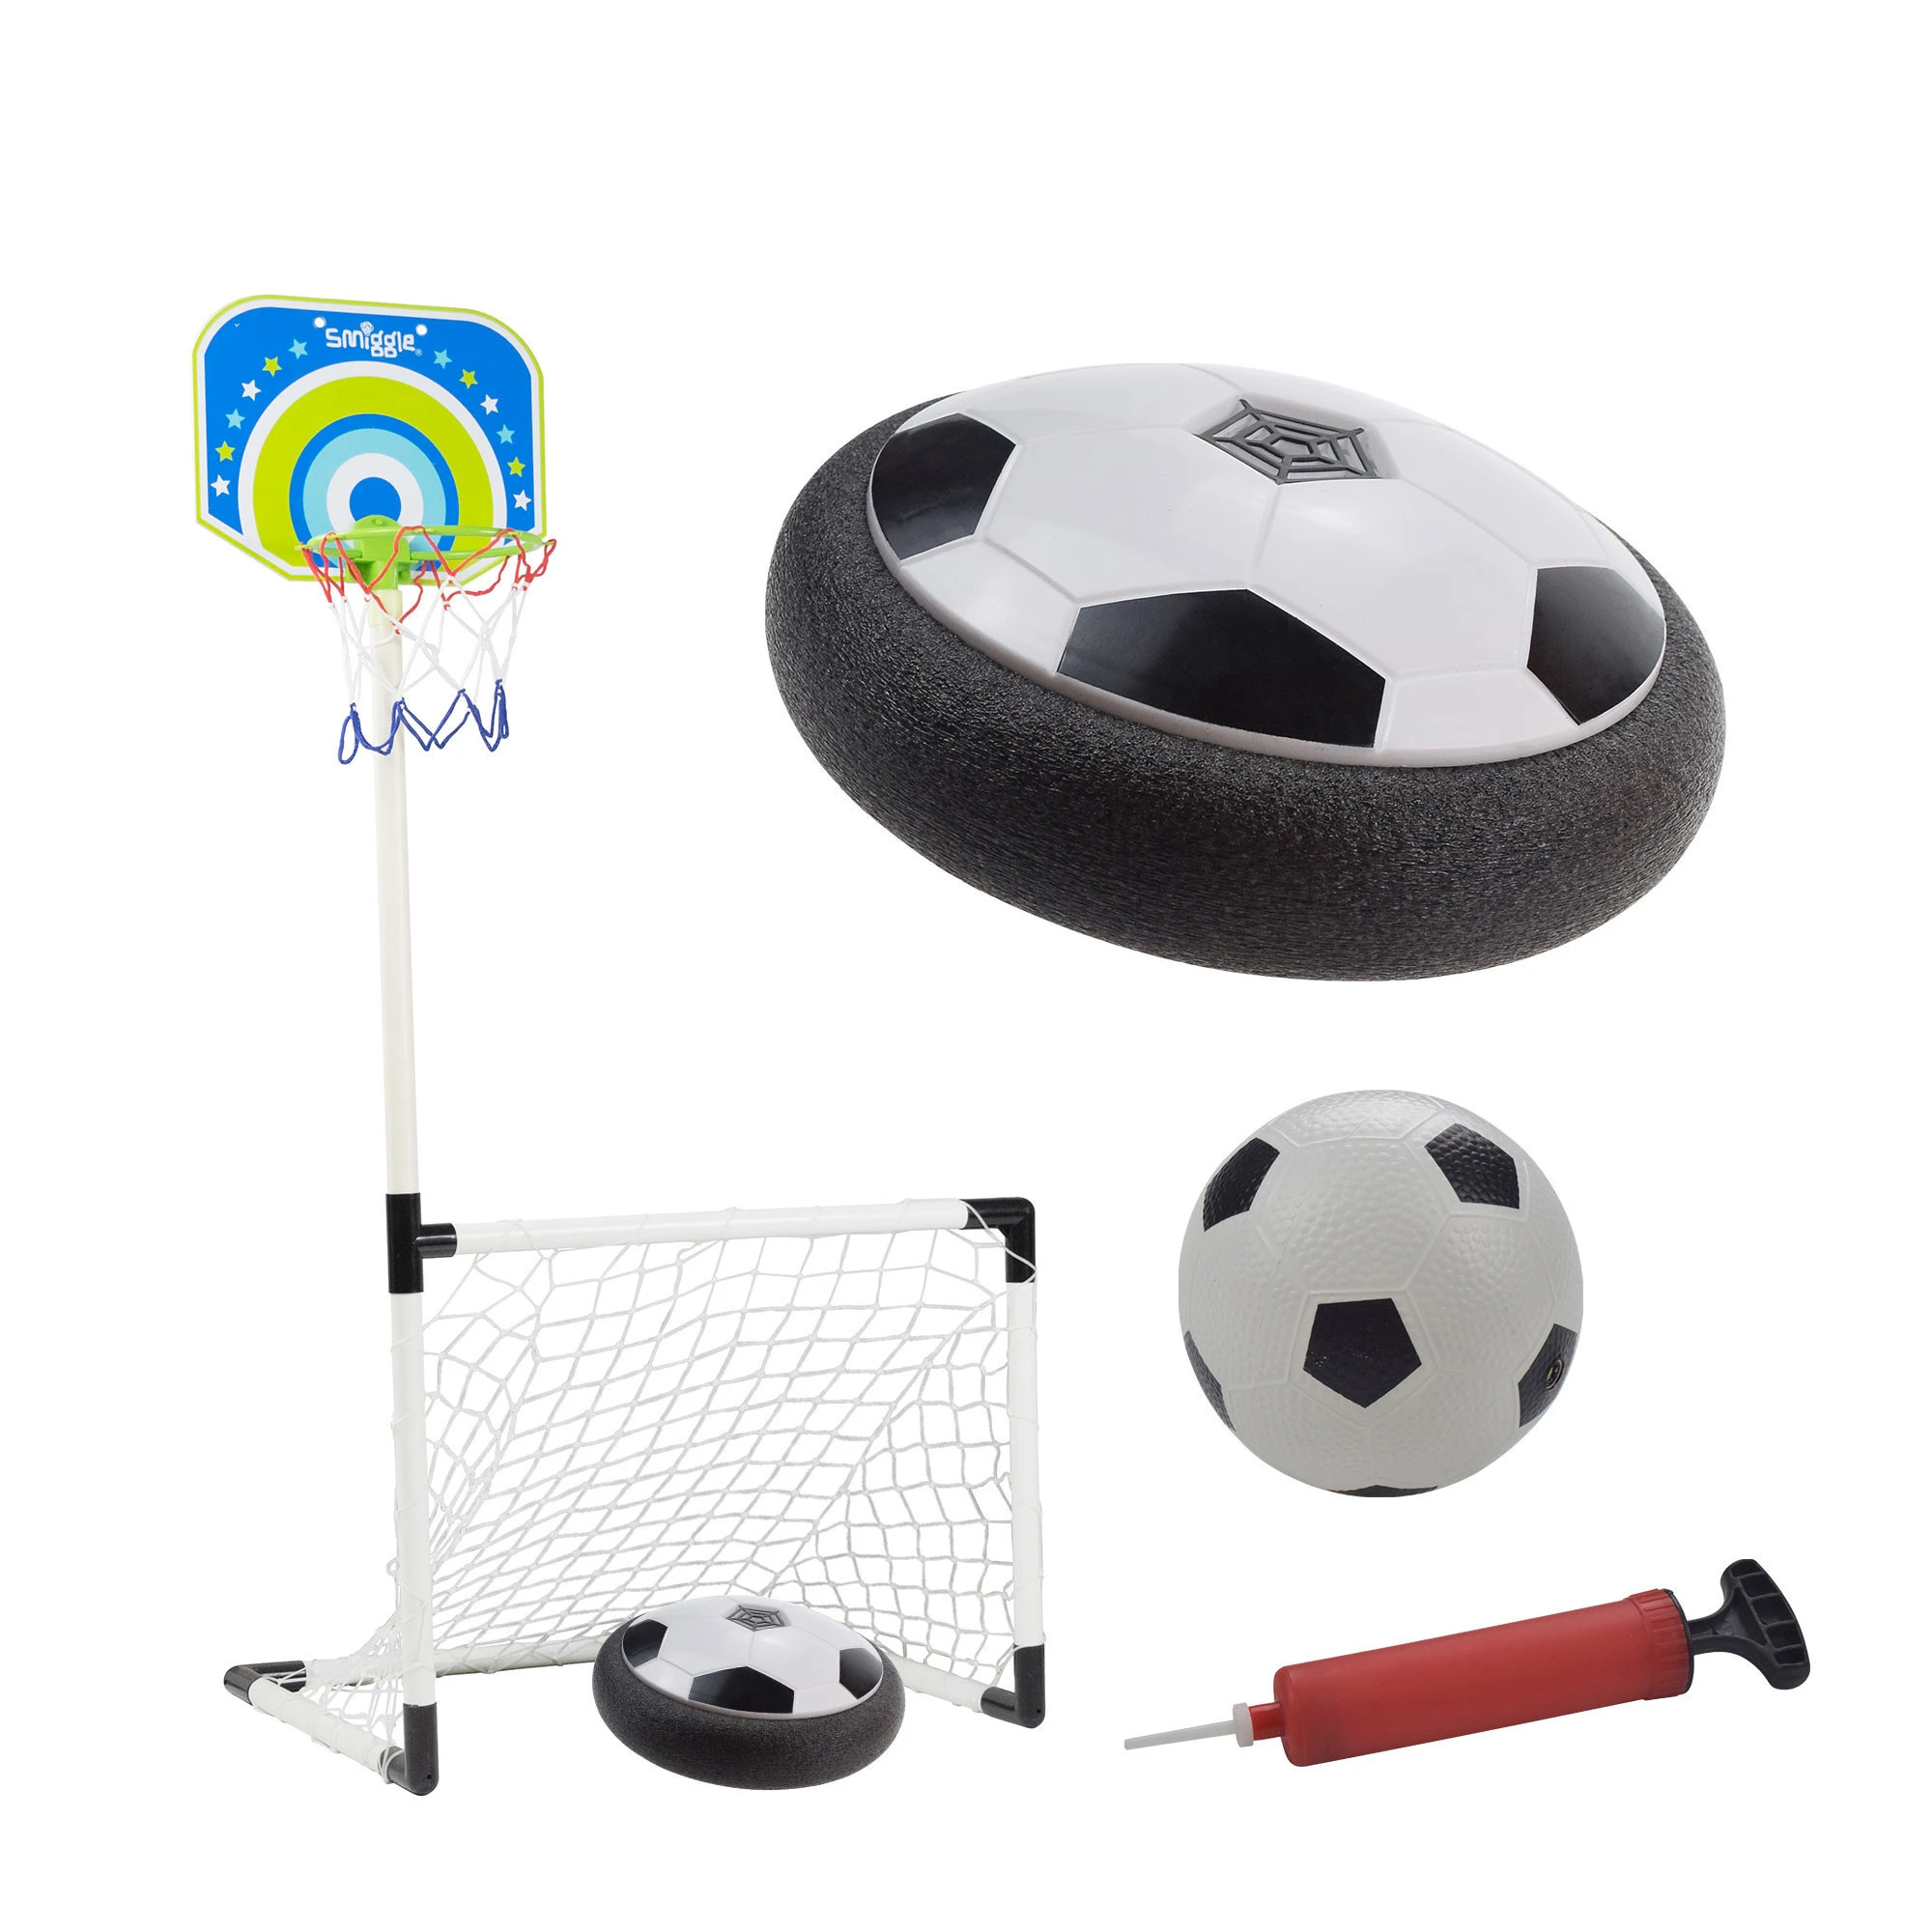 Indoor Toys Kids Toy Soccer Ball Set with Basketball Set Other Classic Toys PP Plastic Eco-friendly Decompression Accpected 19cm